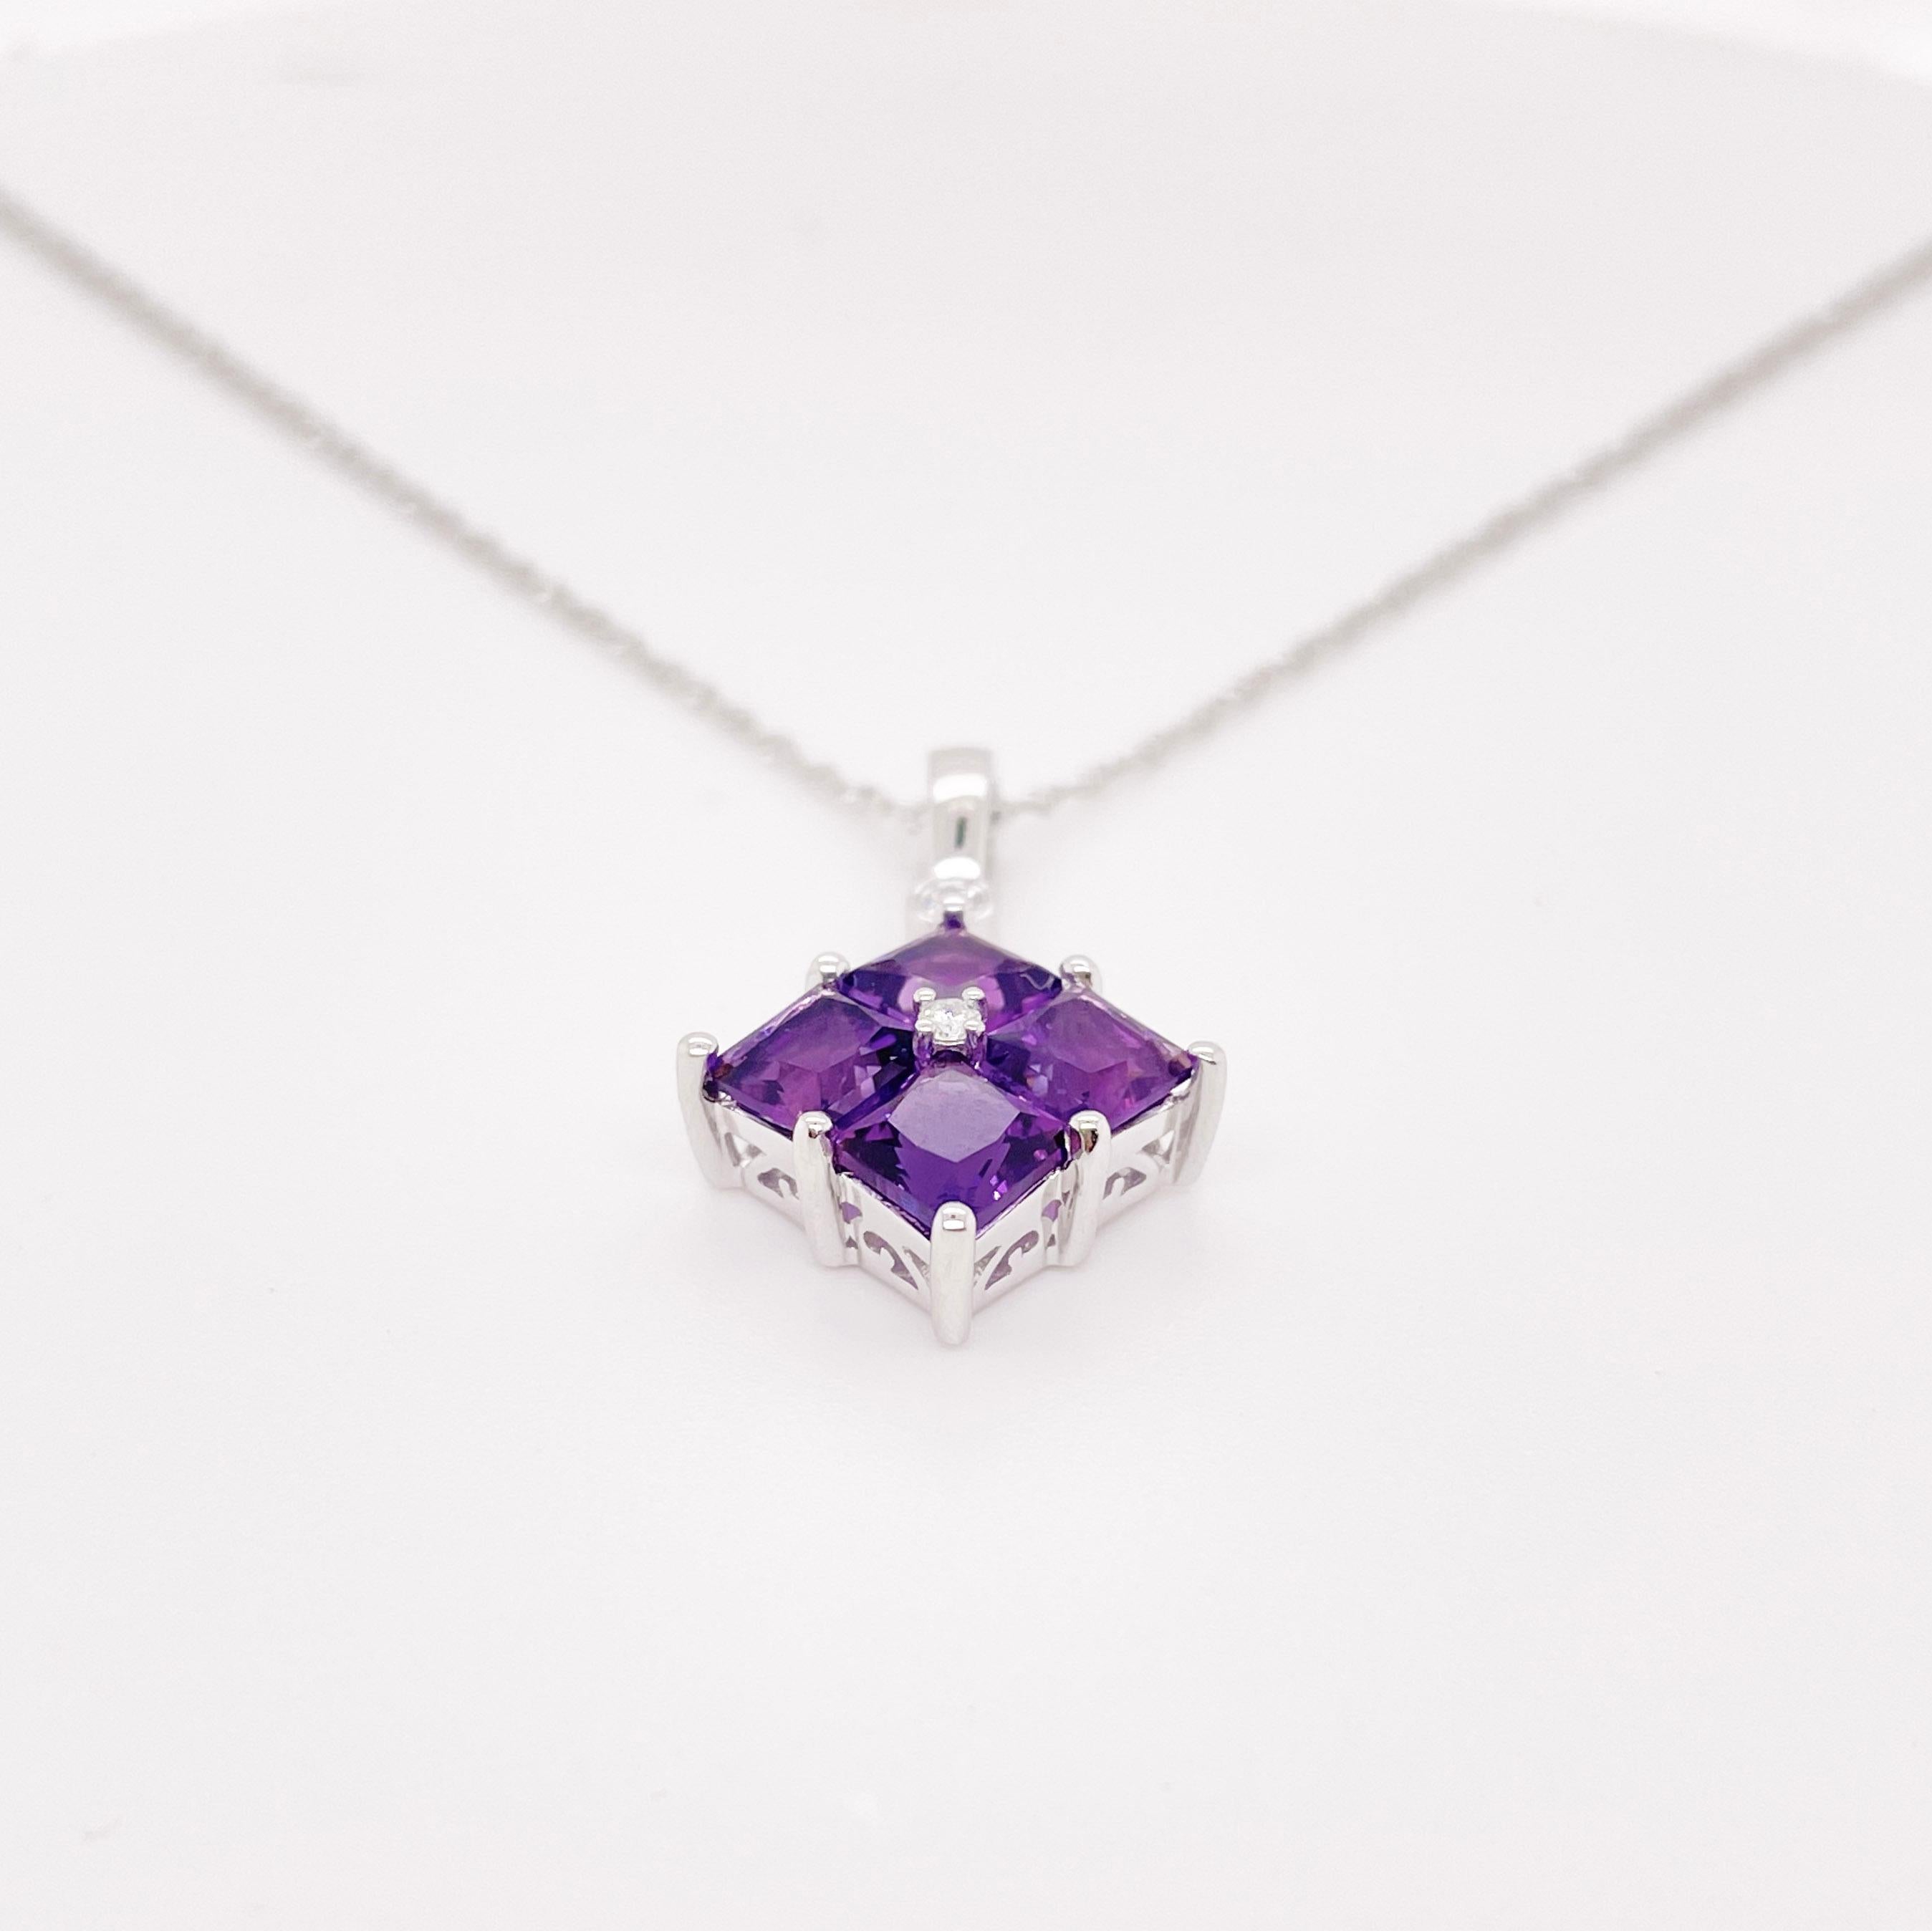 This stunningly unique necklace has four princess cut amethysts and two round diamonds. Amethysts are know to relieve stress and anxiety in your life by providing peace and stability. This necklace with these beautiful, deep purple stones is perfect